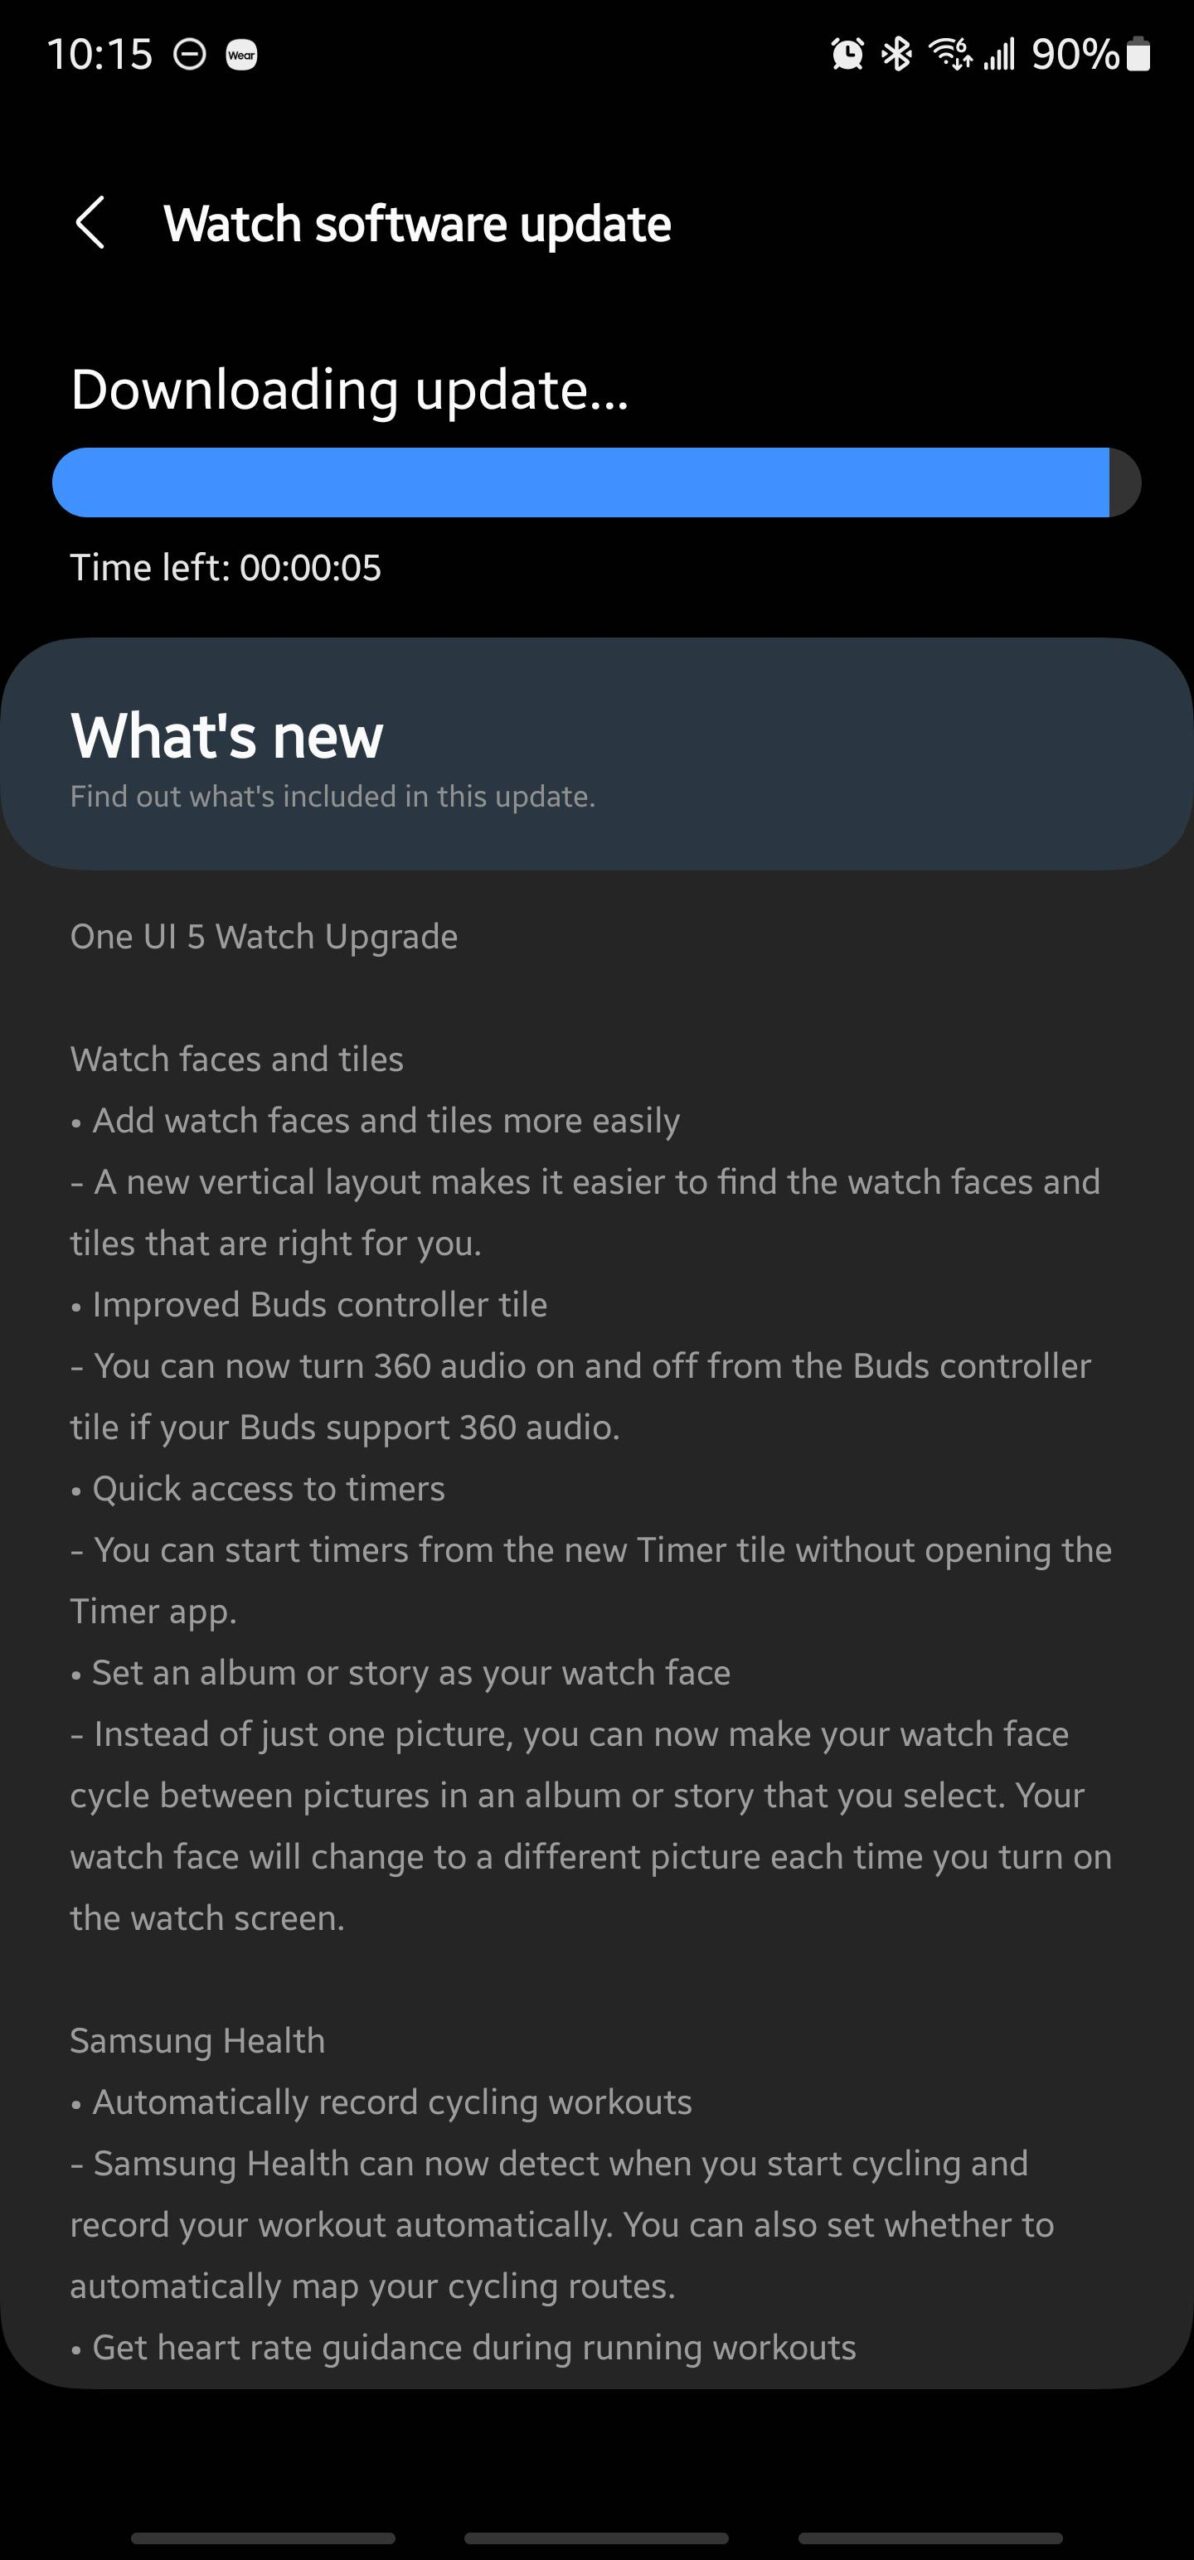 One UI 5 Watch Stable